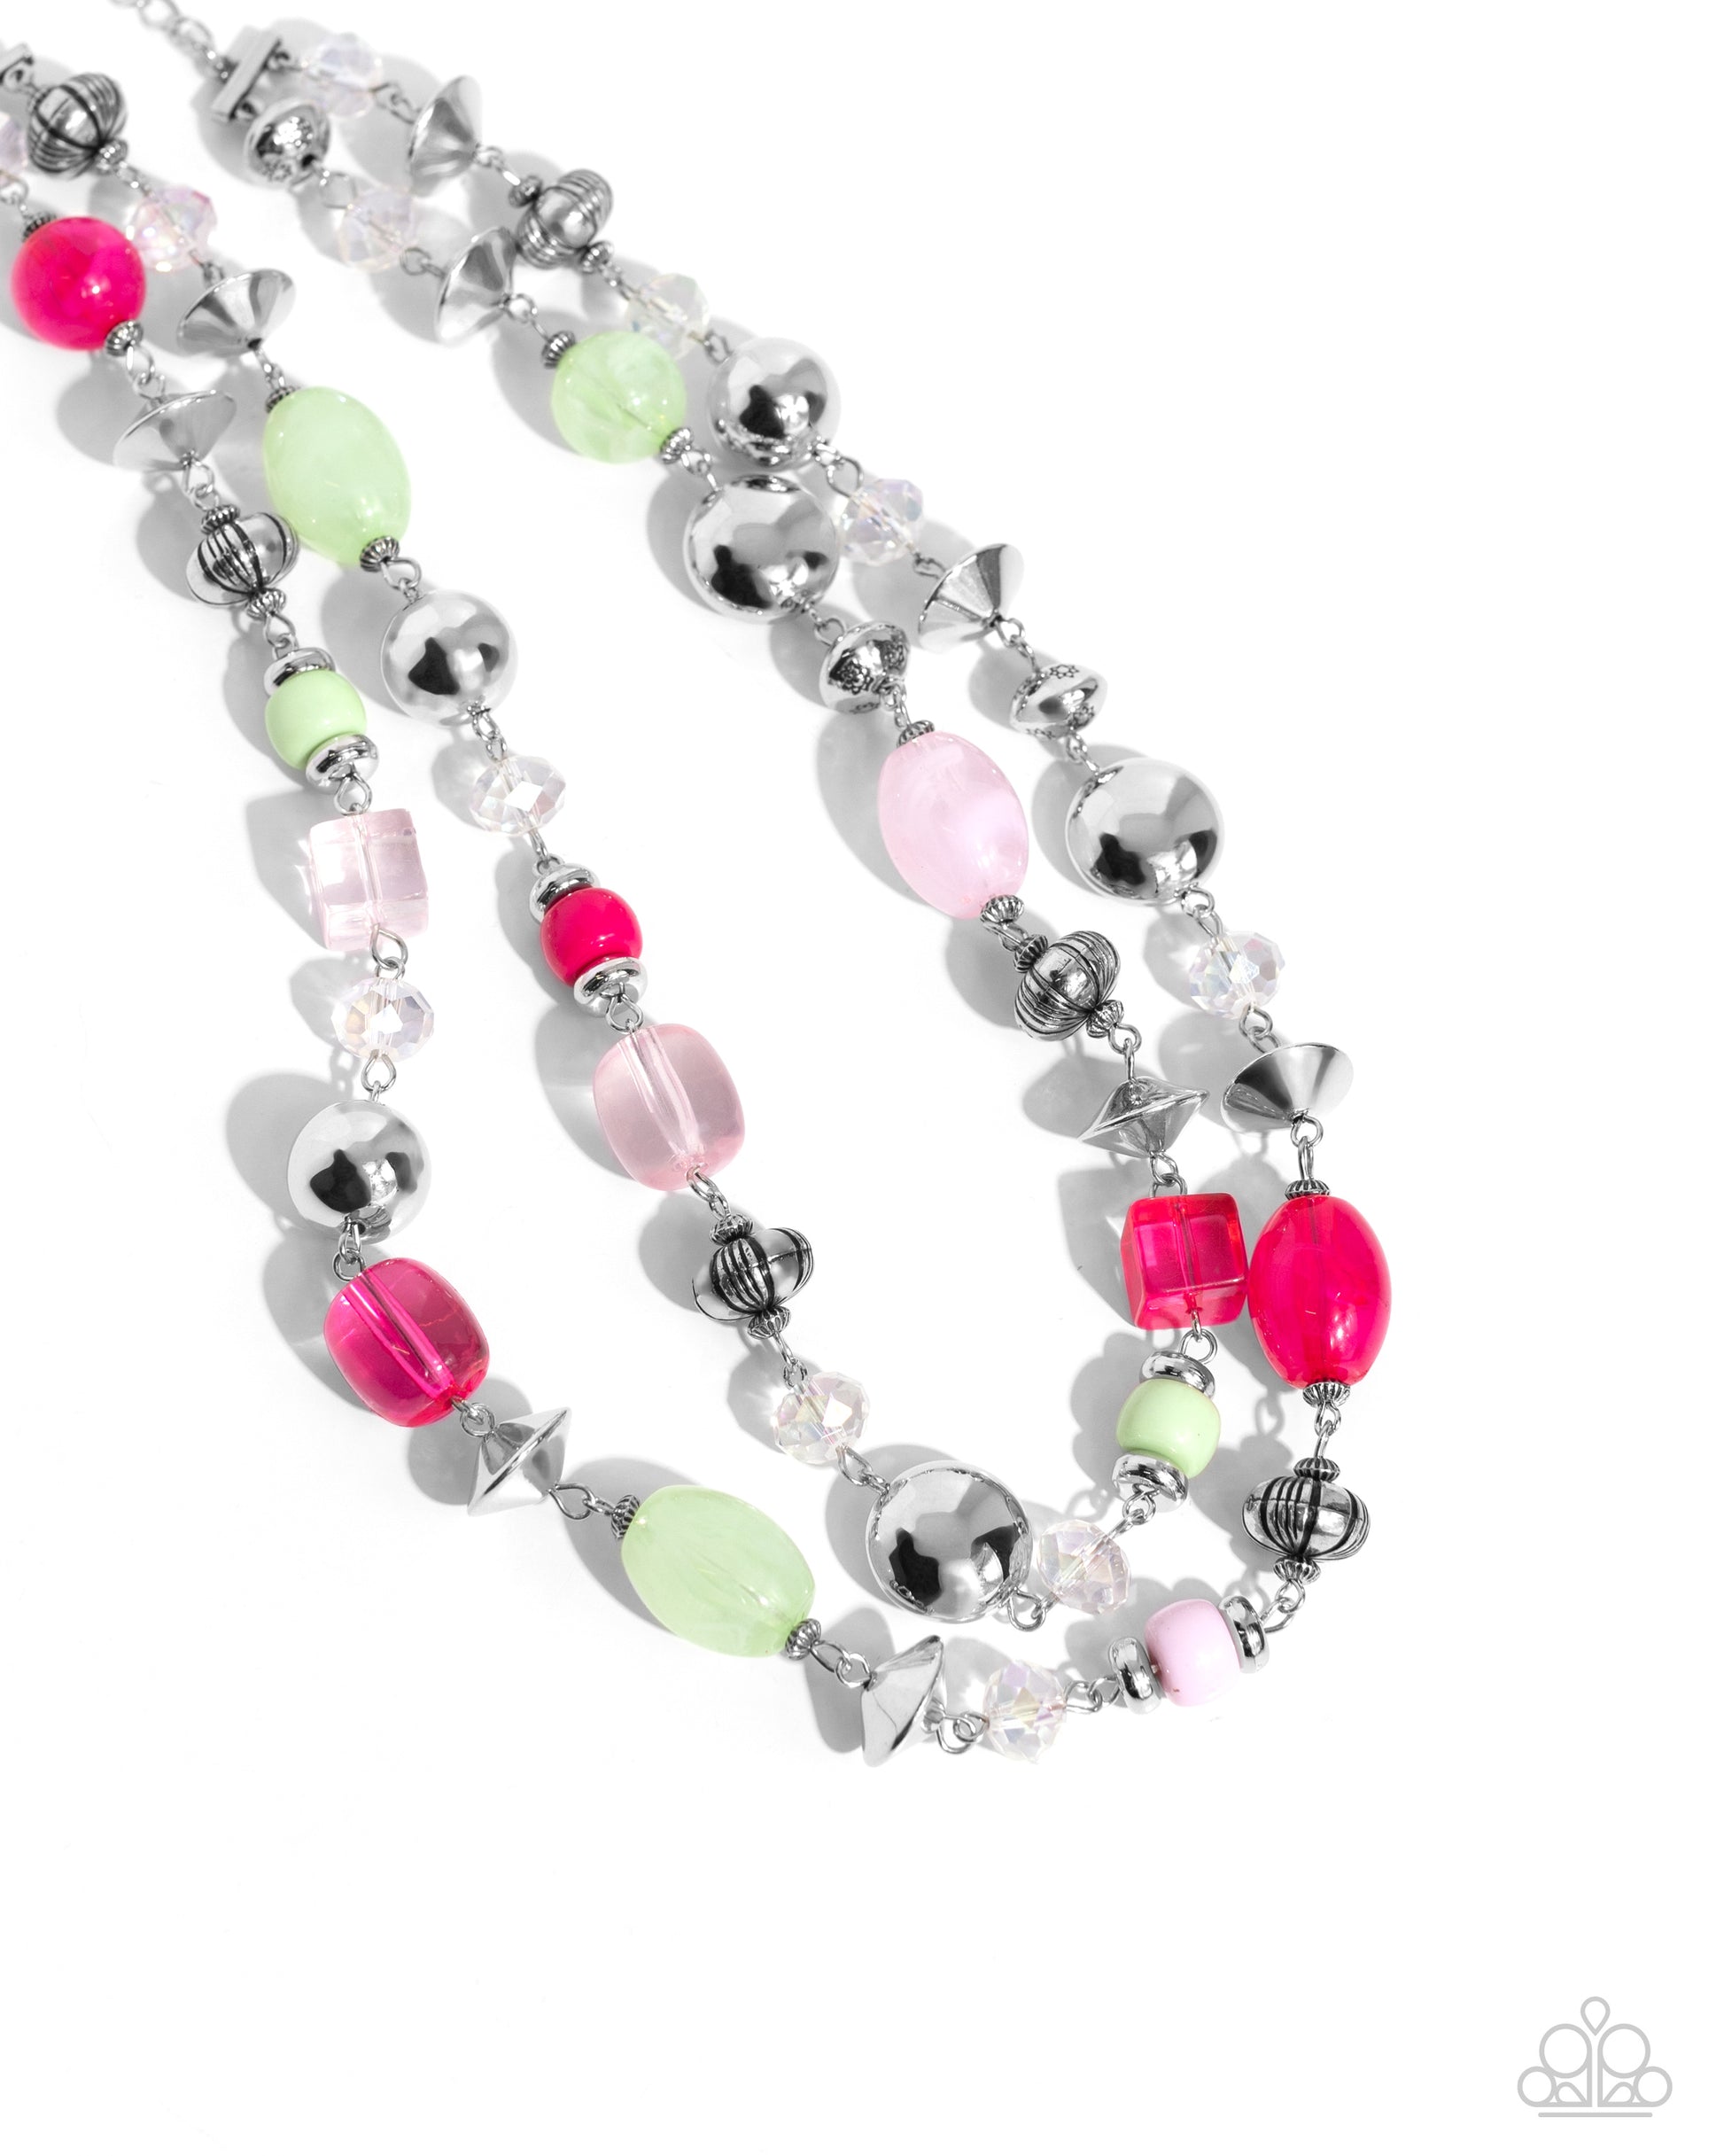 Playful Past Pink Necklace - Paparazzi Accessories  Featuring a variety of opacities, a collection of Pink Peacock, light pink, and Mint beads join various textured silver beads and faceted iridescent beads along the neckline in two layers for a playfully, colorful look. Features an adjustable clasp closure. Due to its prismatic palette, color may vary.  Sold as one individual necklace. Includes one pair of matching earrings.  SKU: P2ST-PKXX-179XX